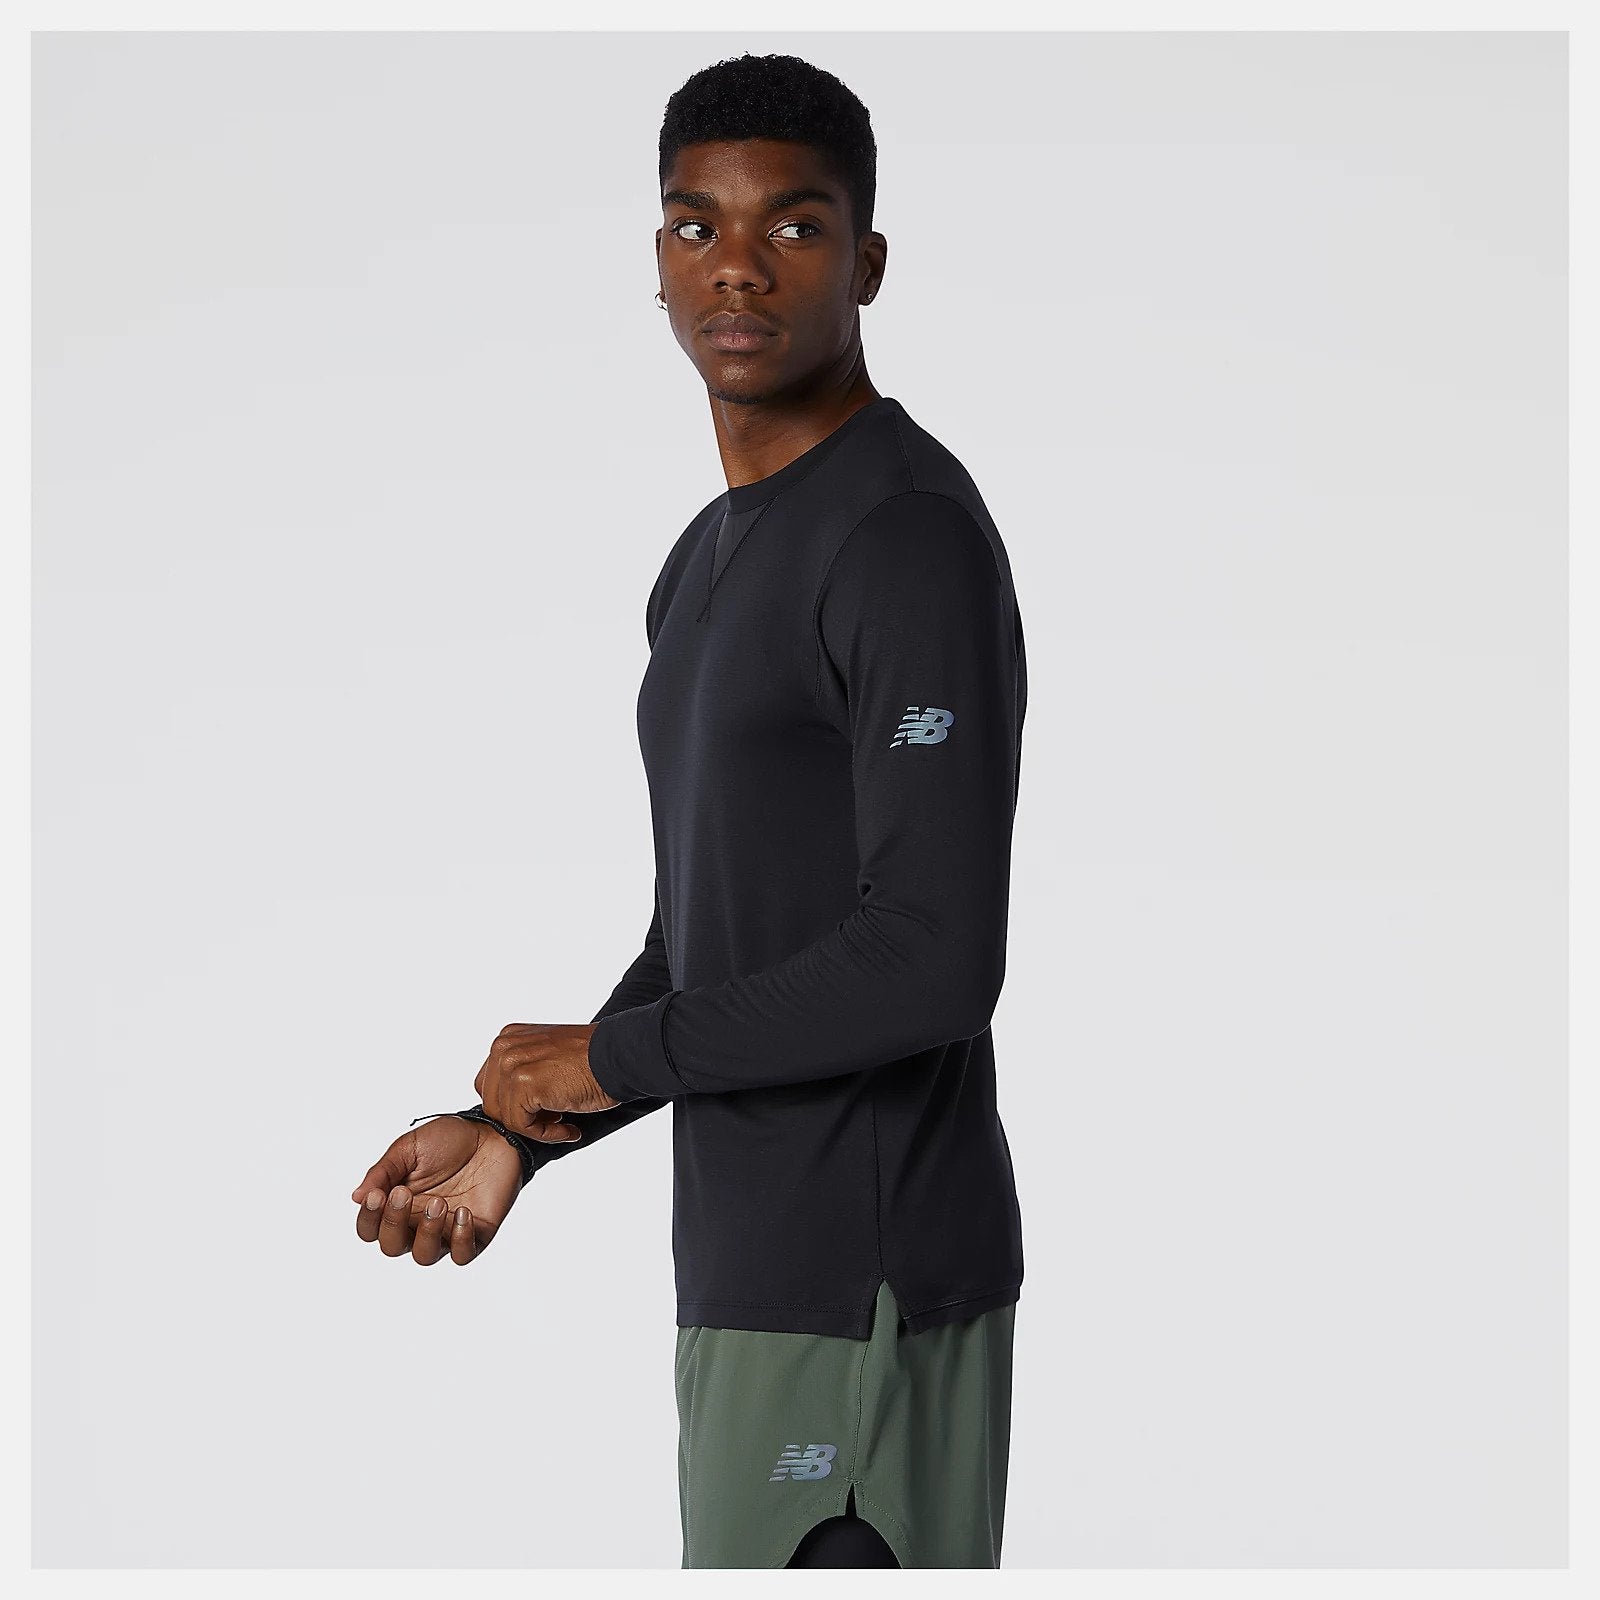 Side view featuring the New Balance logo of the Men's Q Speed 1NTRO Long Sleeve in black